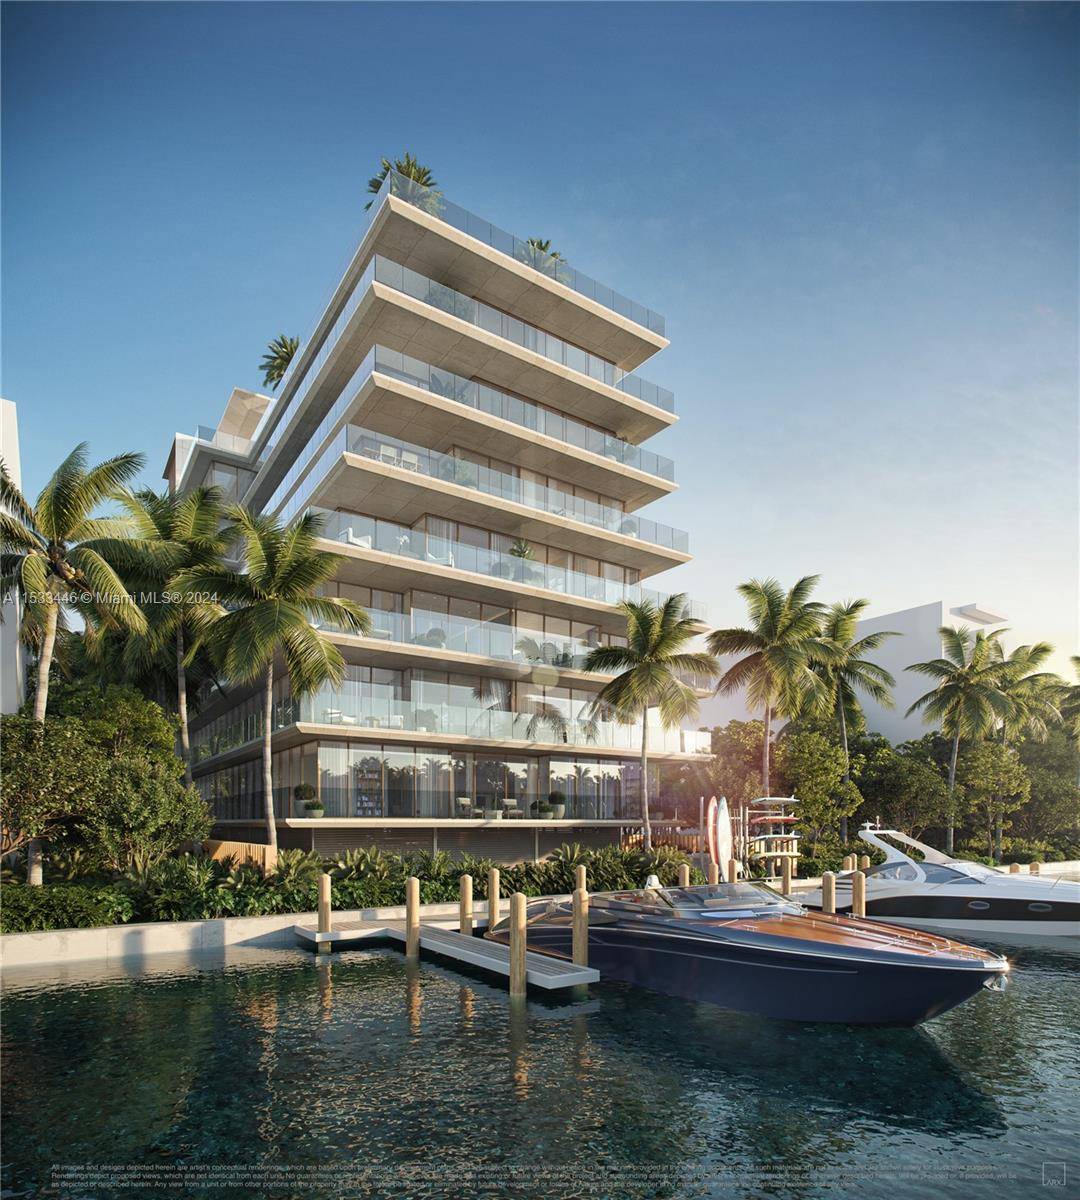 Experience waterfront luxury living at its finest in this exquisite 3 bedroom residence at La Mare.